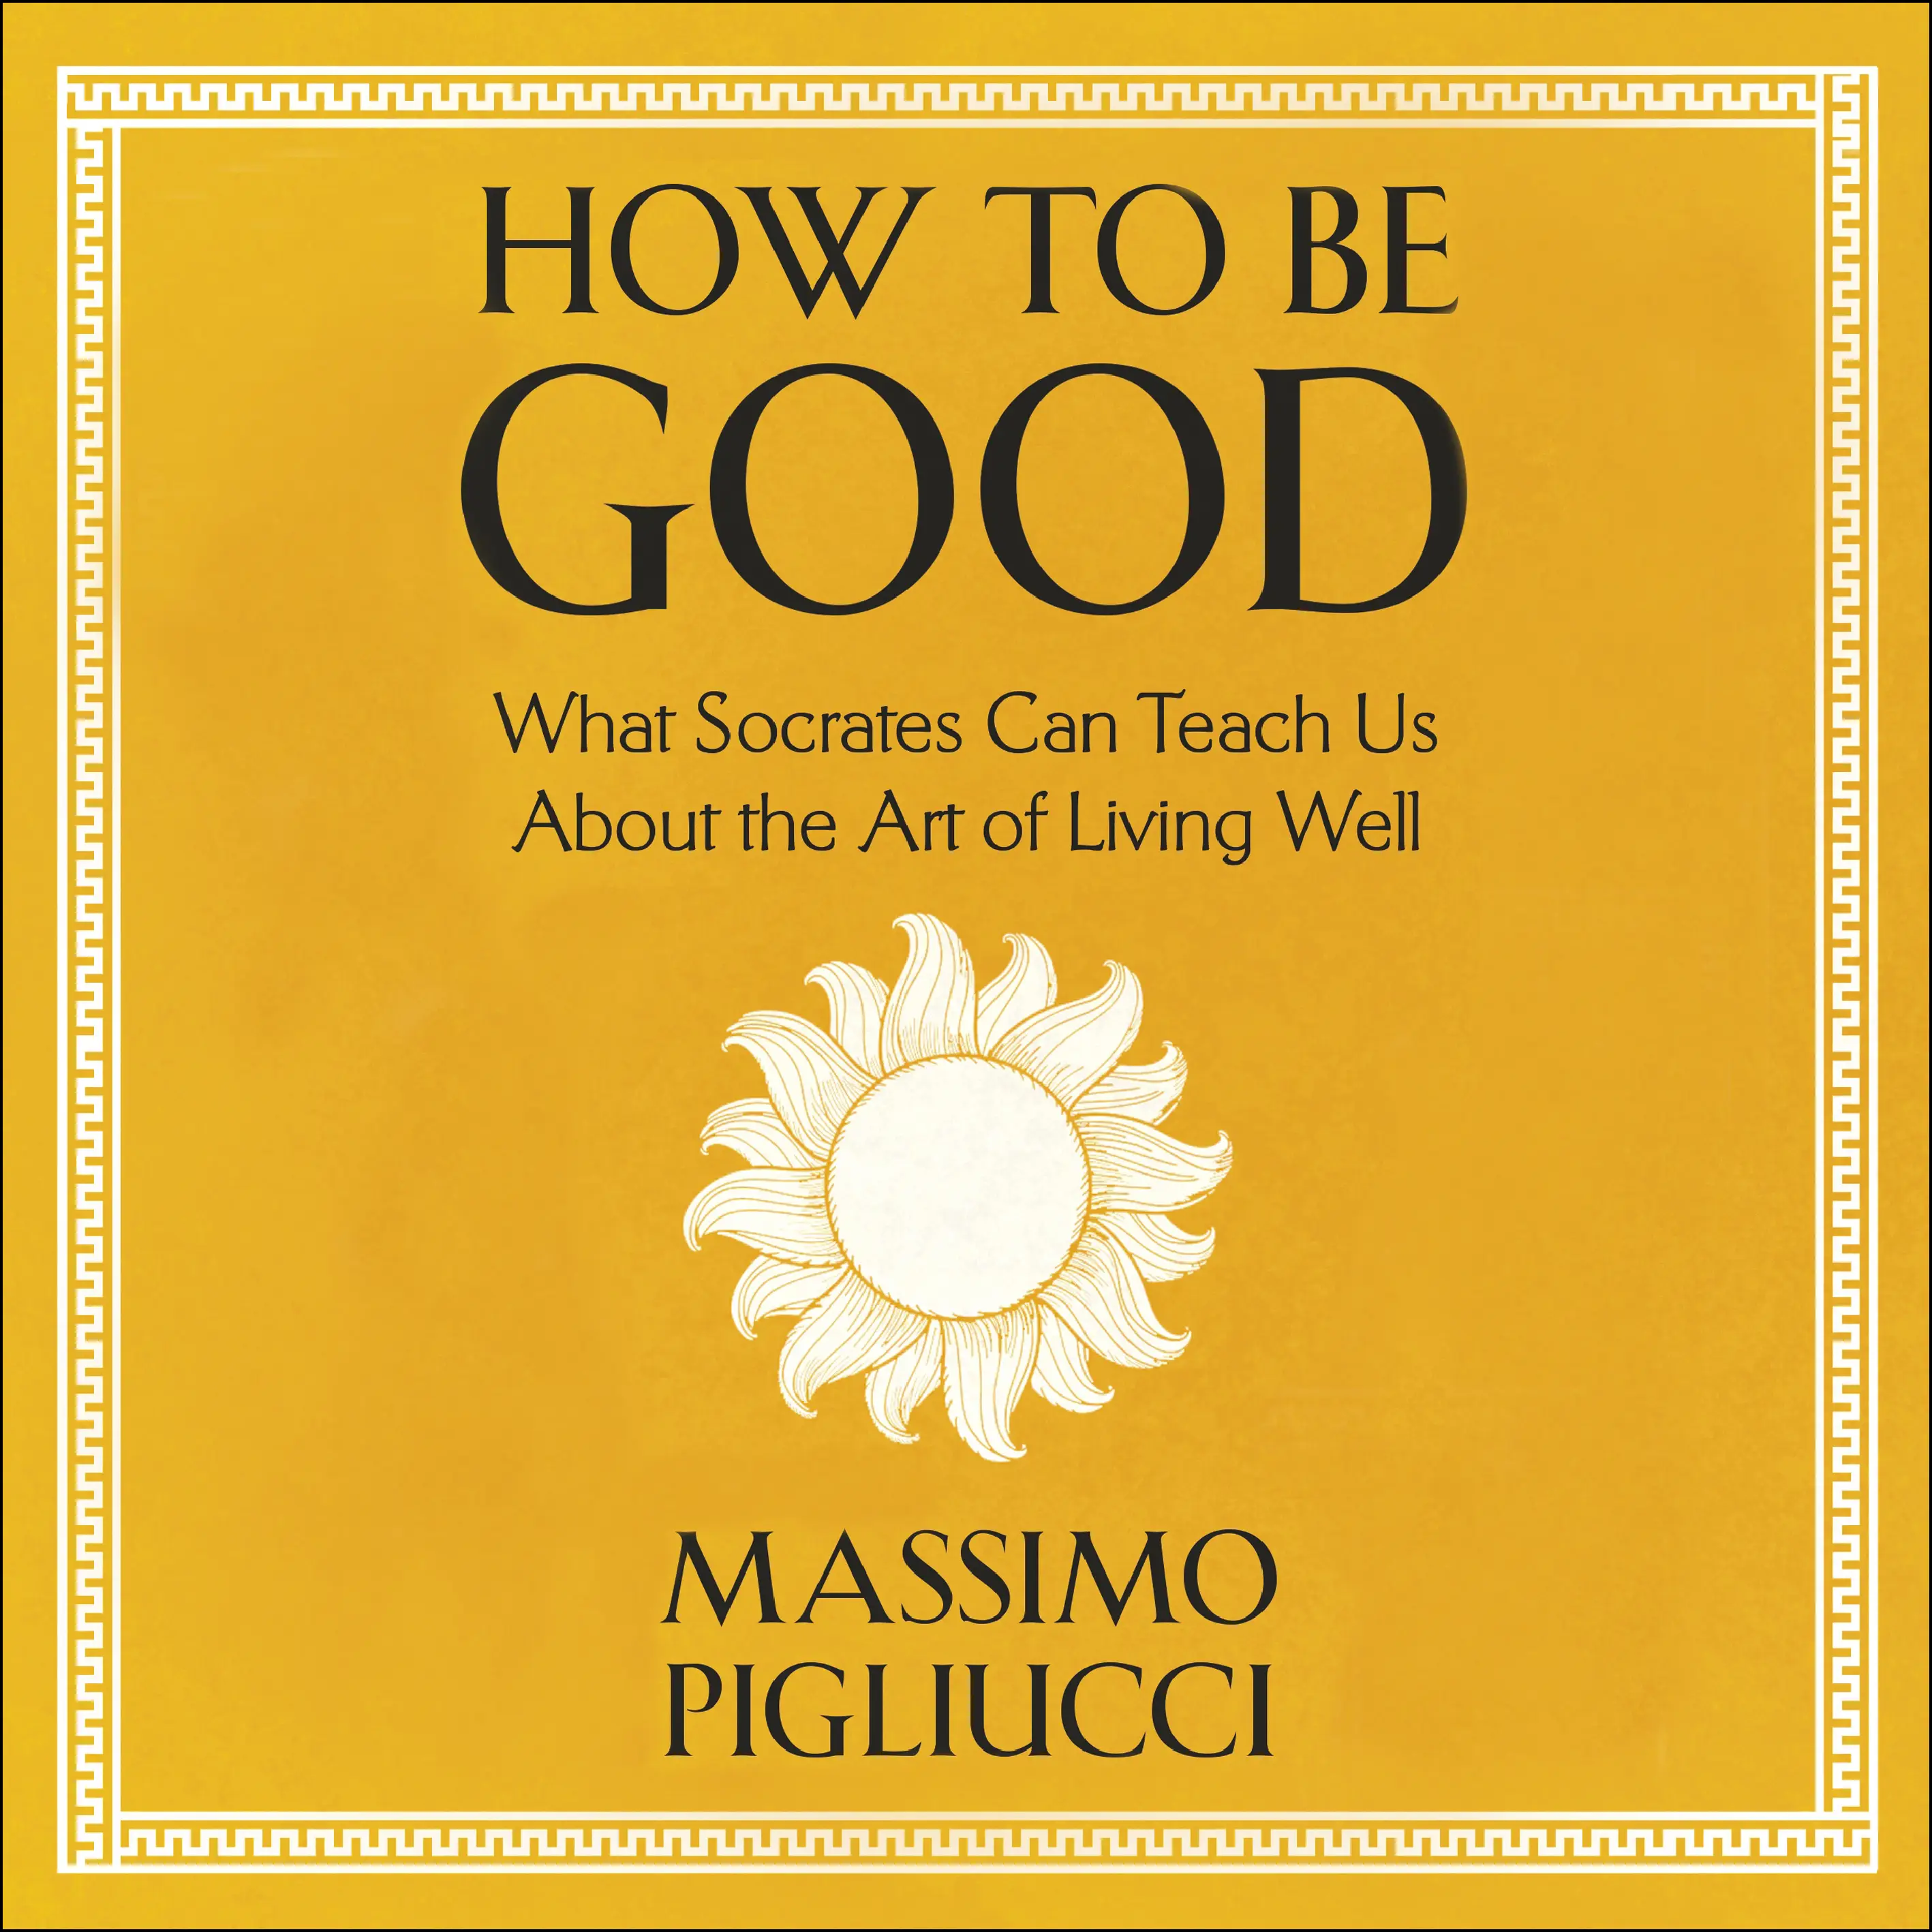 How To Be Good